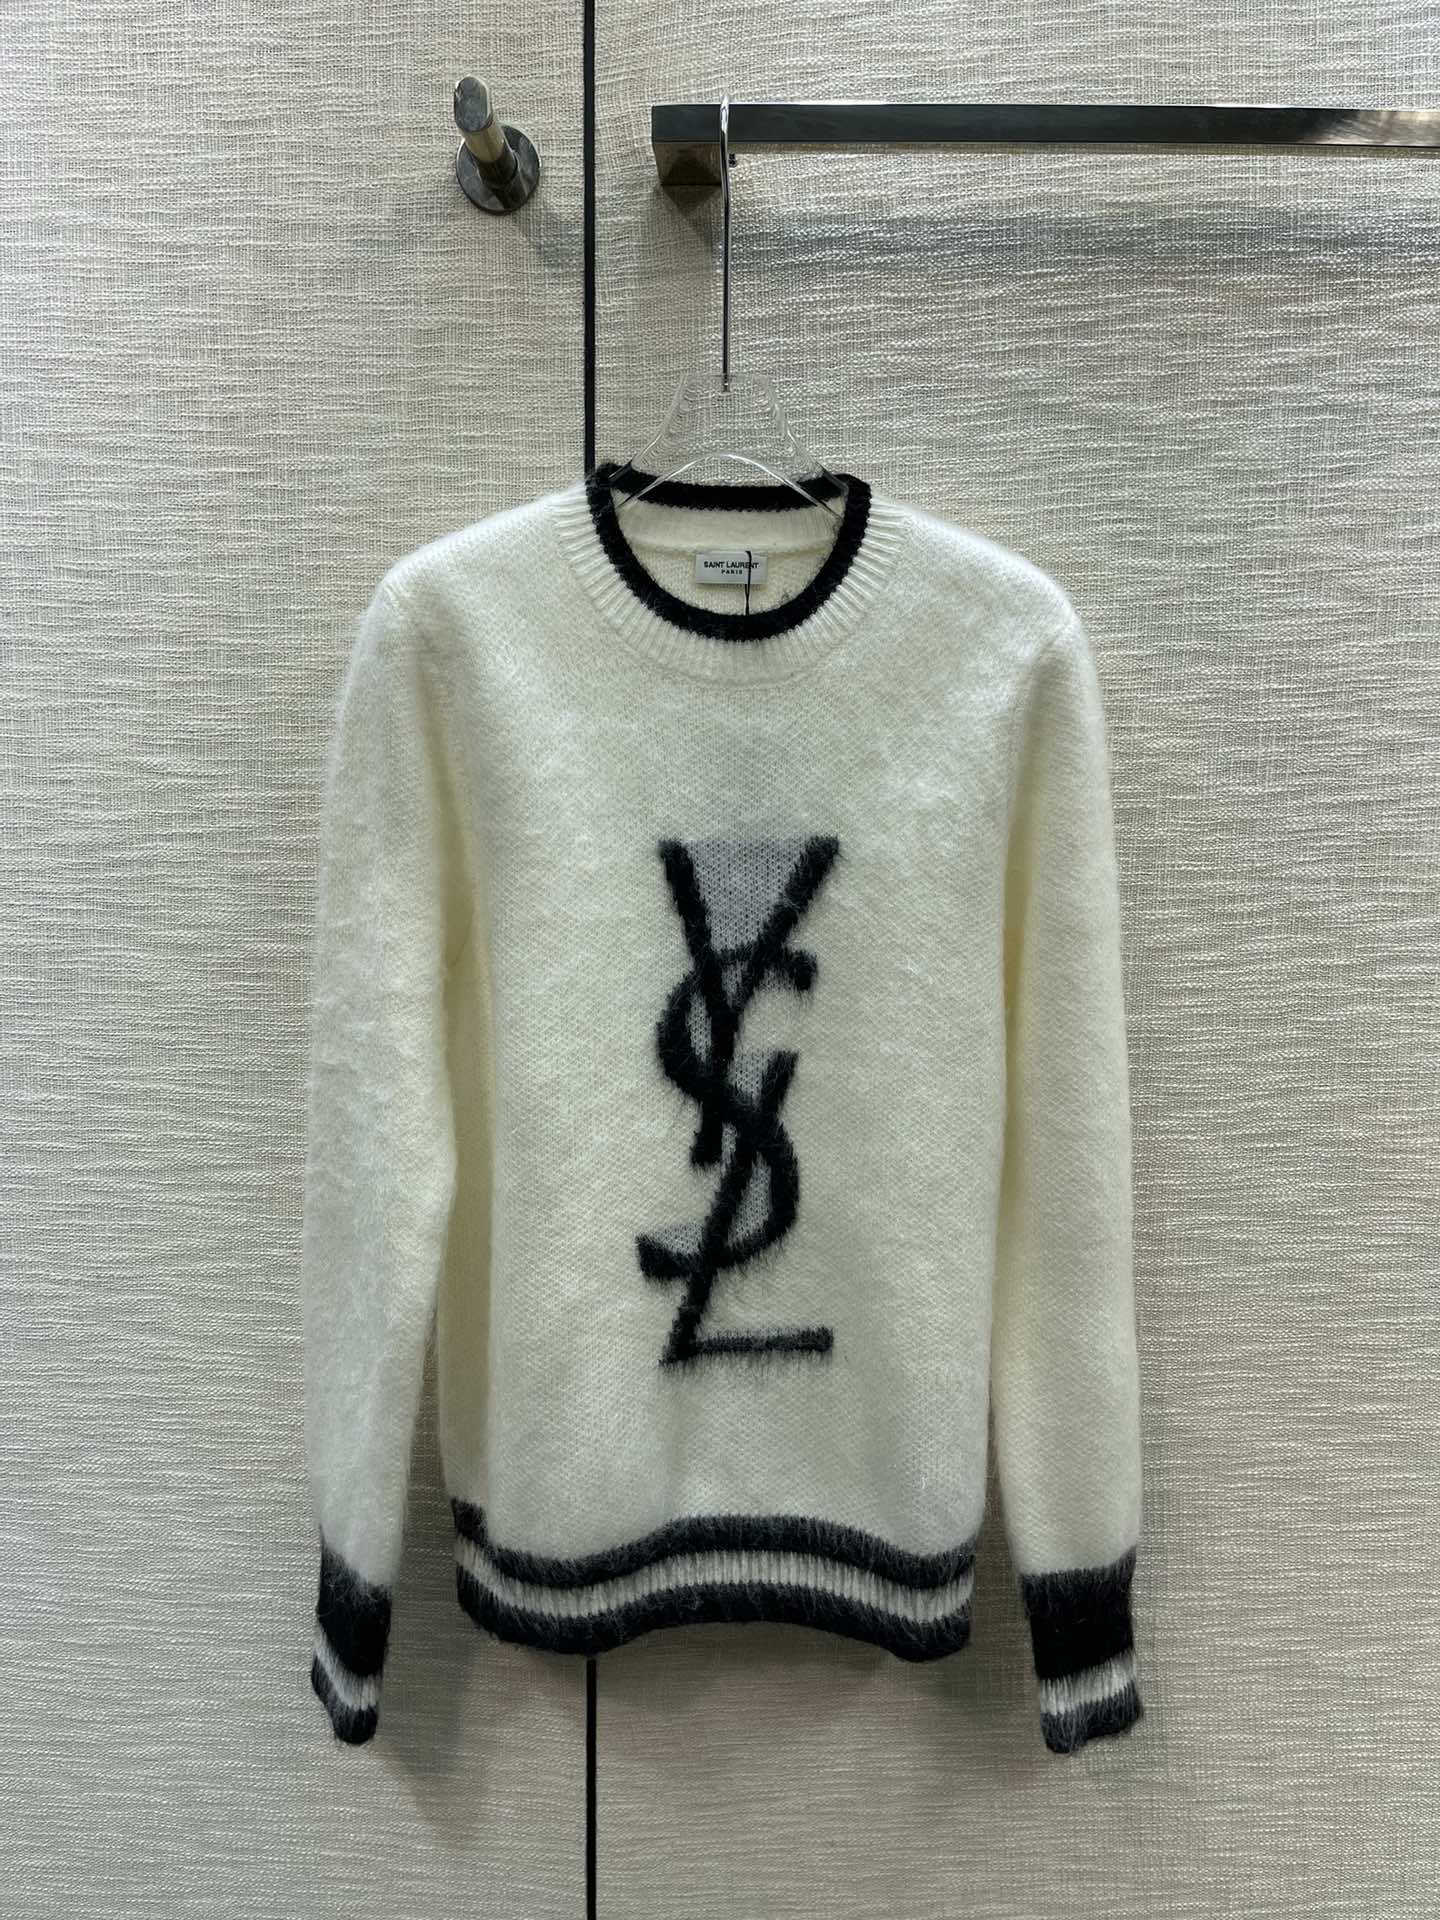 Yves Saint Laurent Clothing Knit Sweater Shirts & Blouses Knitting Fall/Winter Collection